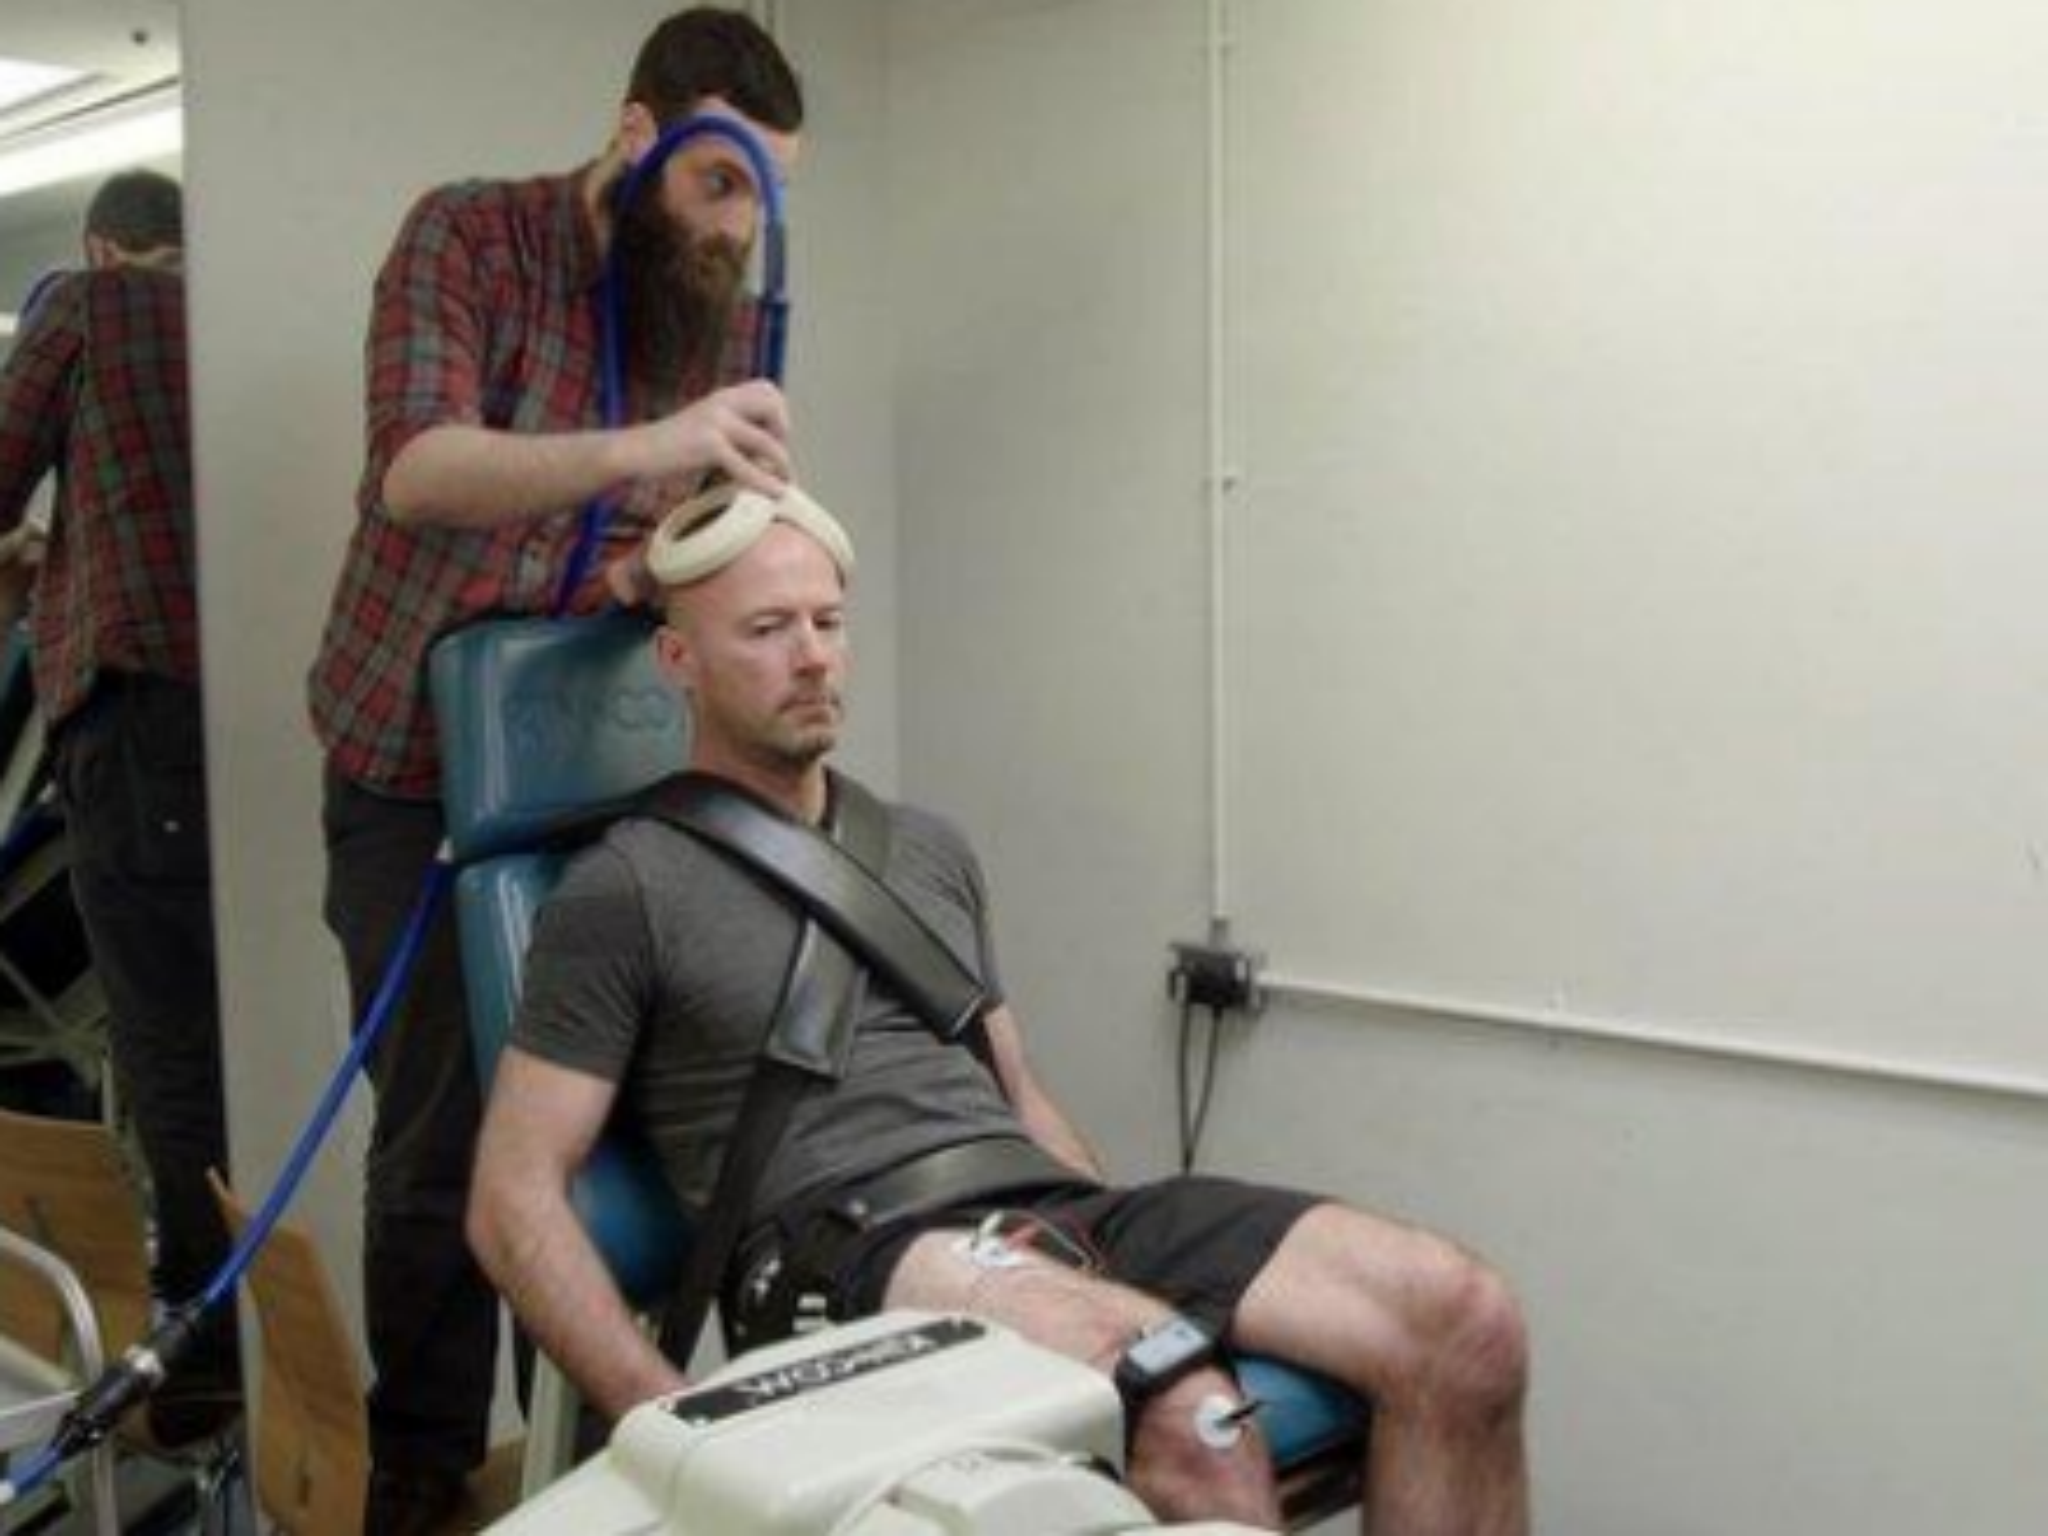 Shearer underwent tests on his own brain in the documentary